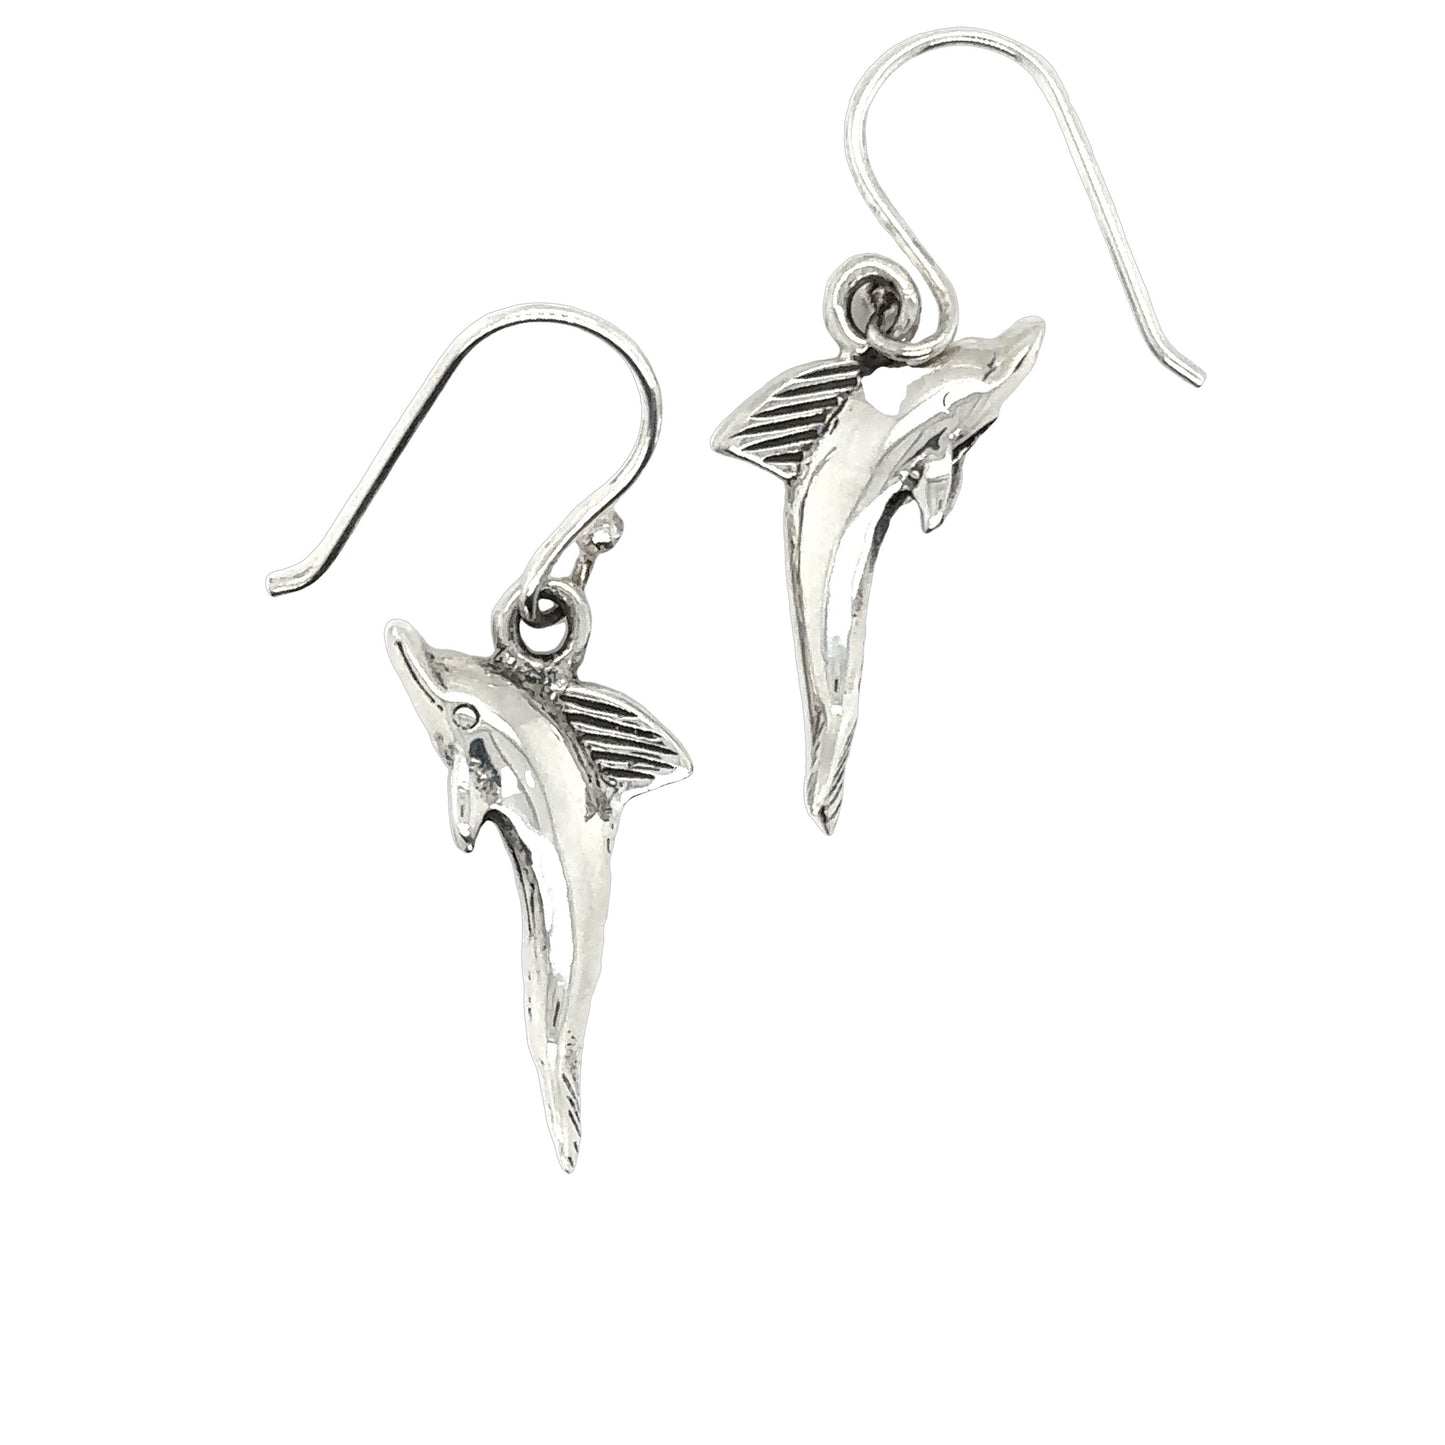 A pair of Super Silver Dolphin Earrings on a white background.